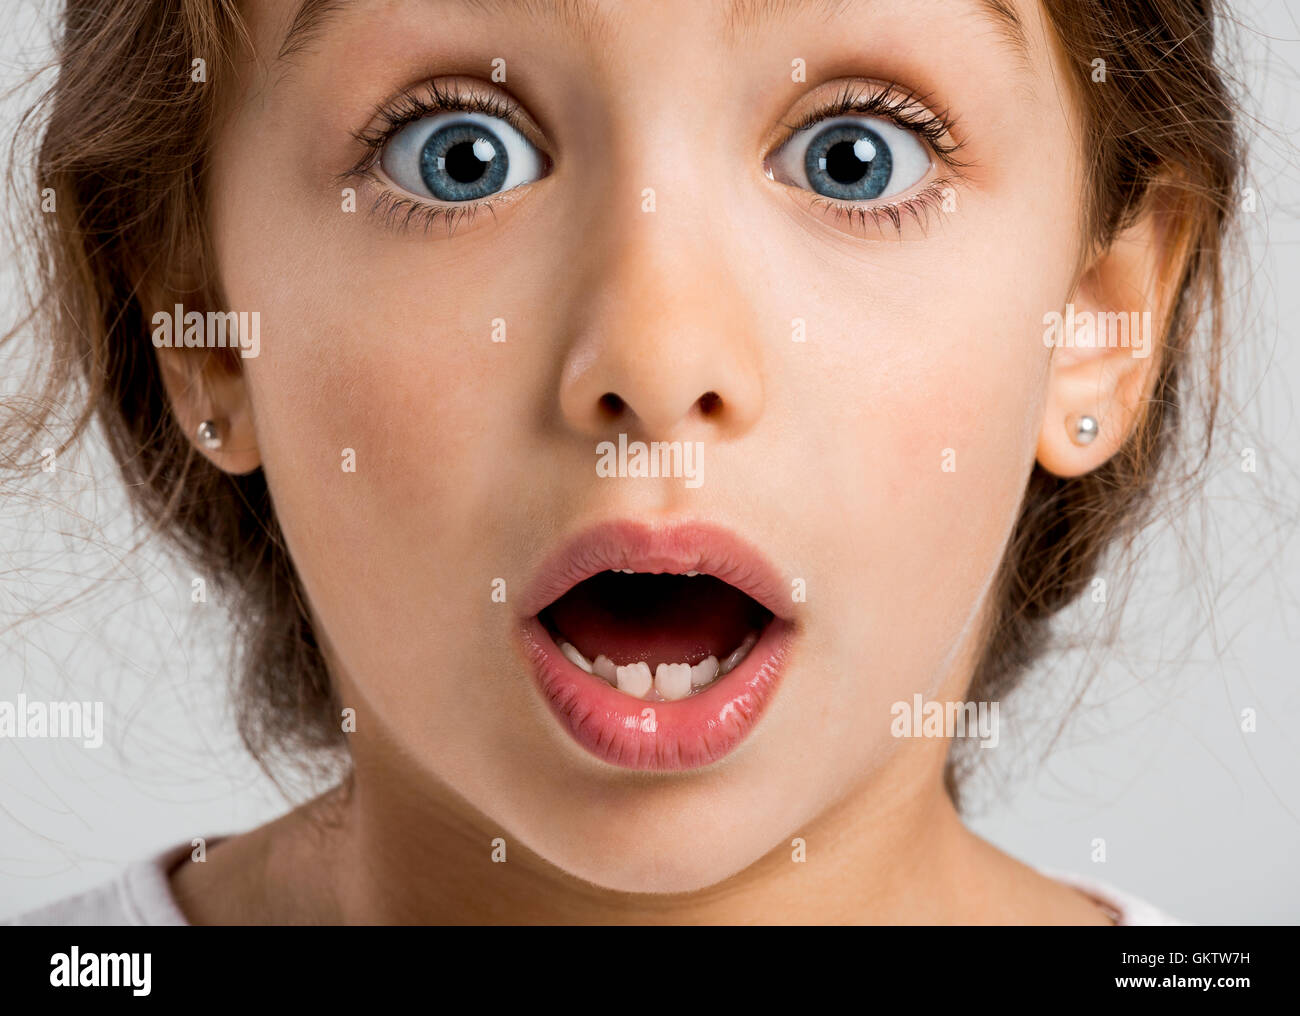 Studio portrait of a happy little girl with a astonished expression Stock Photo